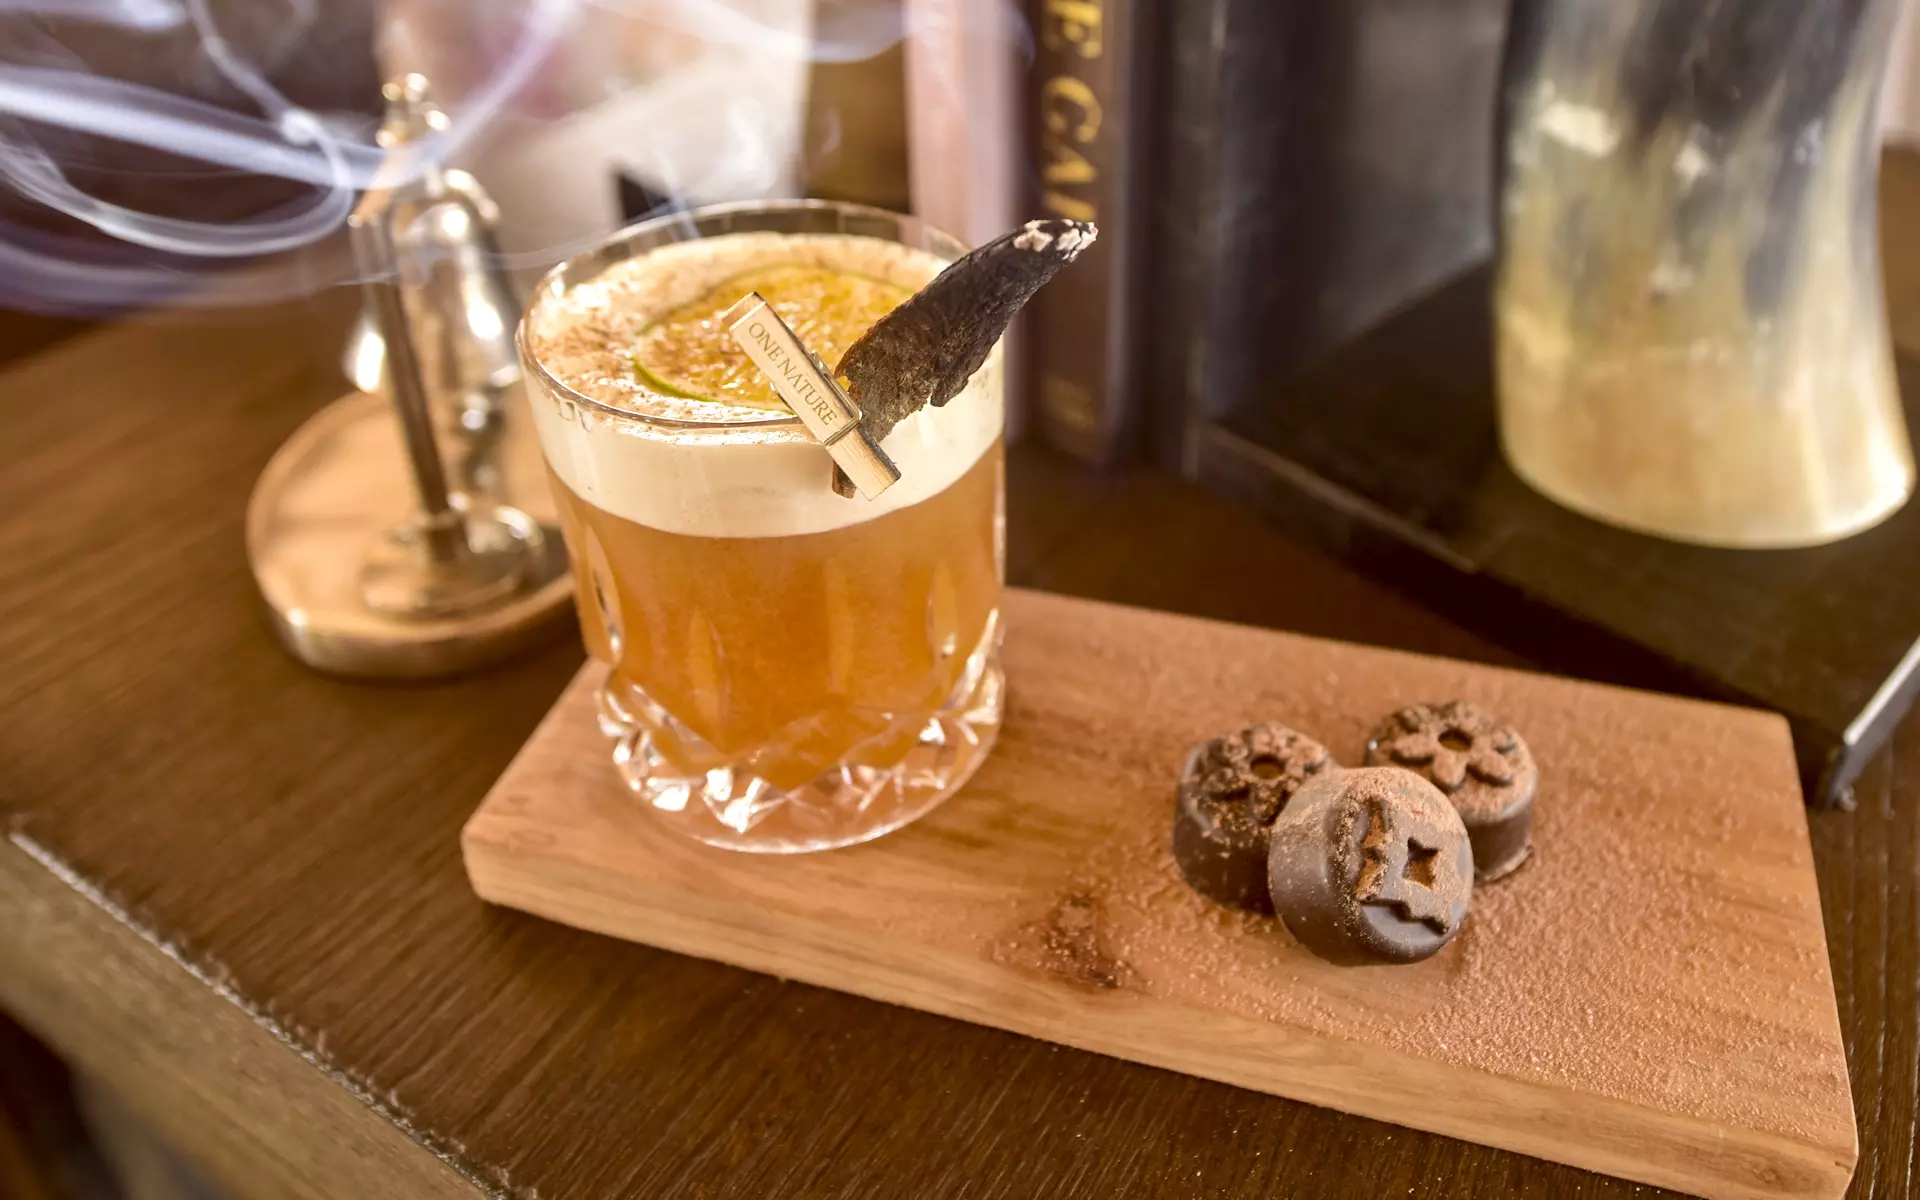 Lioness, our decadent signature cocktail